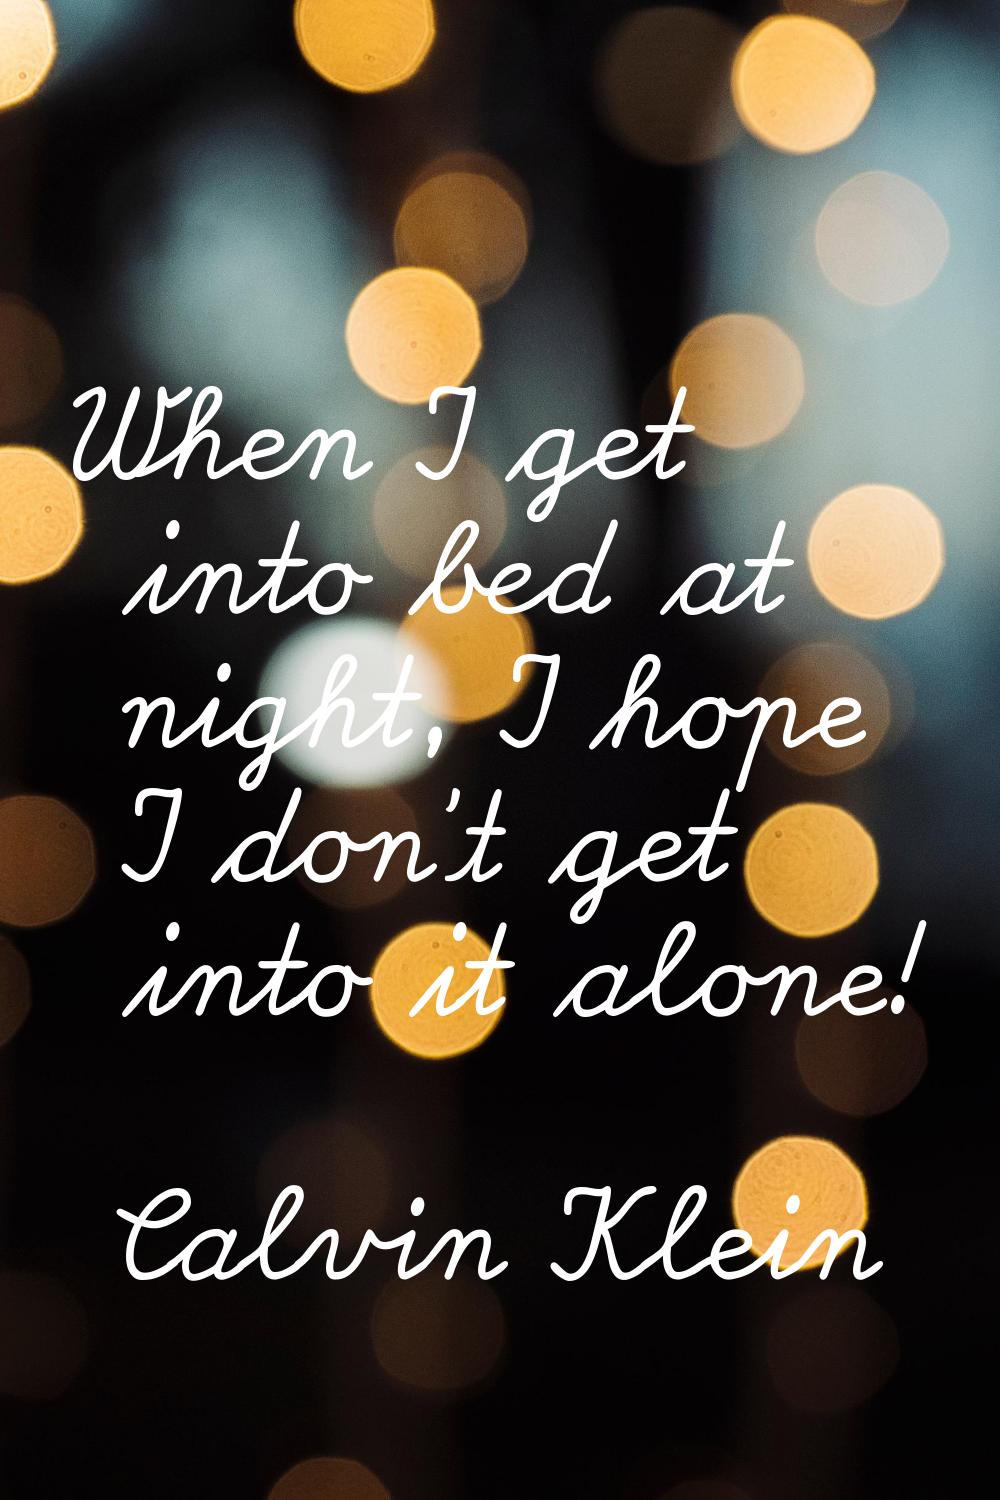 When I get into bed at night, I hope I don't get into it alone!